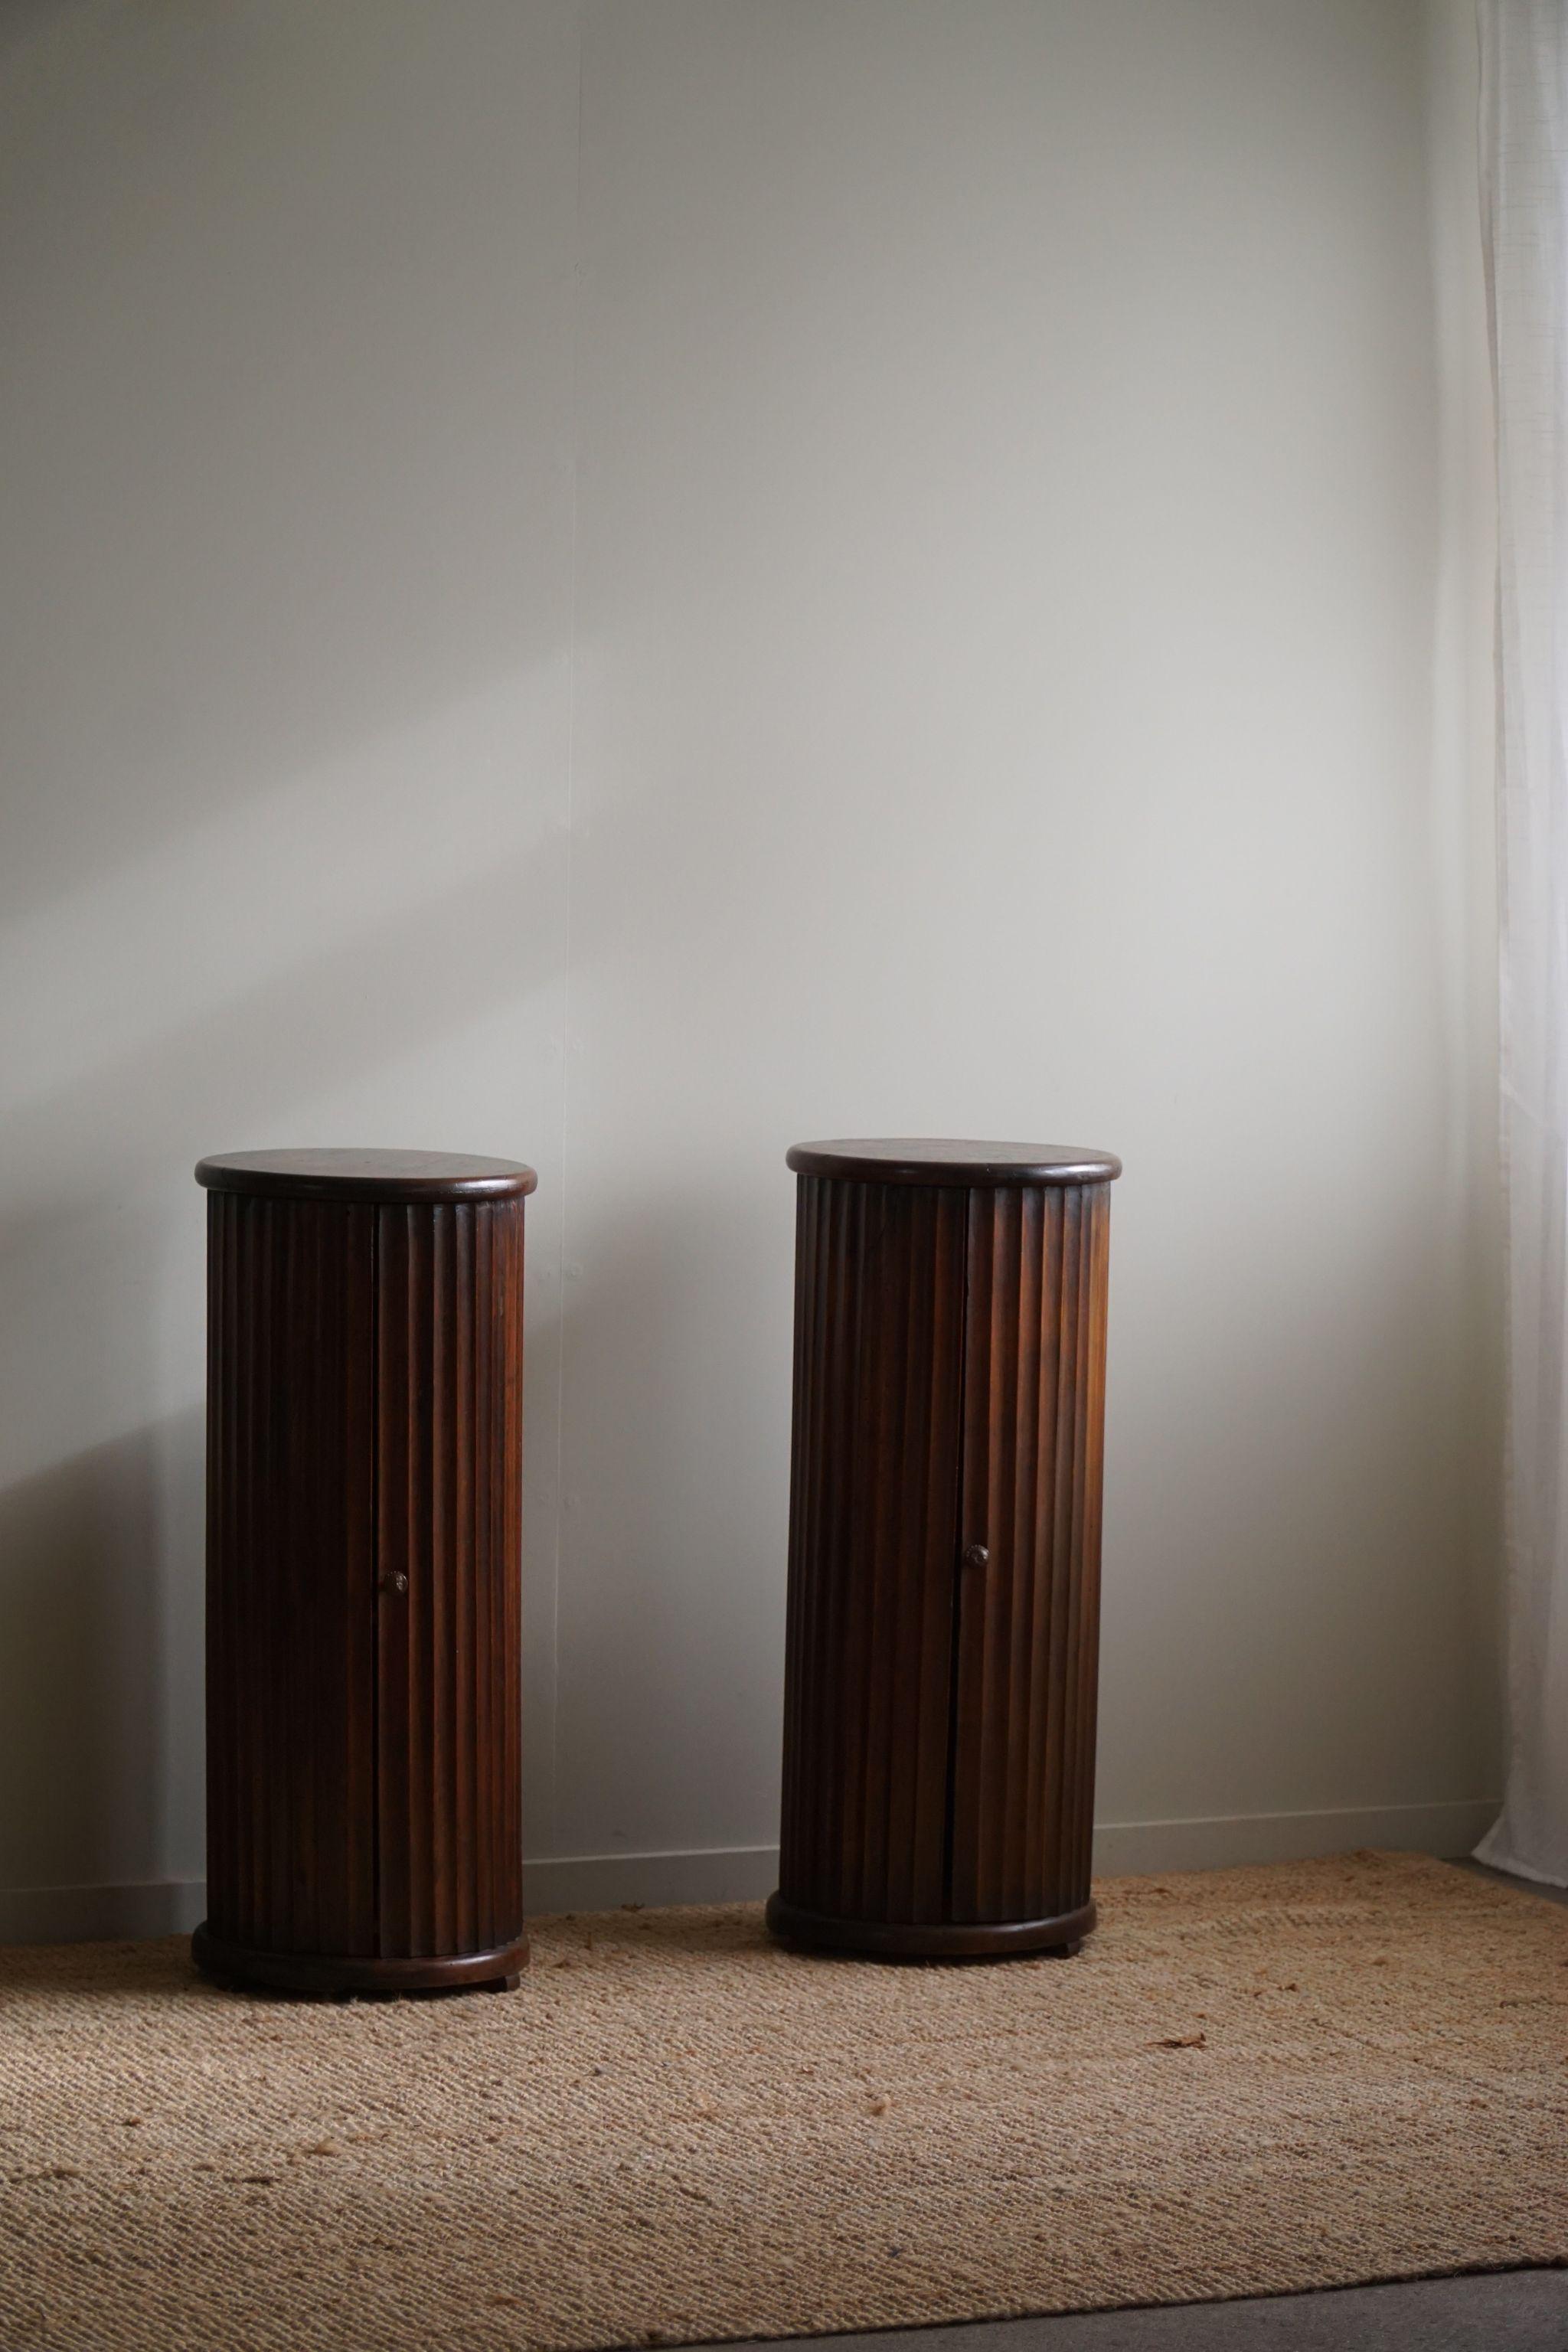 A Pair of Antique Pedestals With Storage, Nutwood, Italian Cabinetmaker, 1880s  12